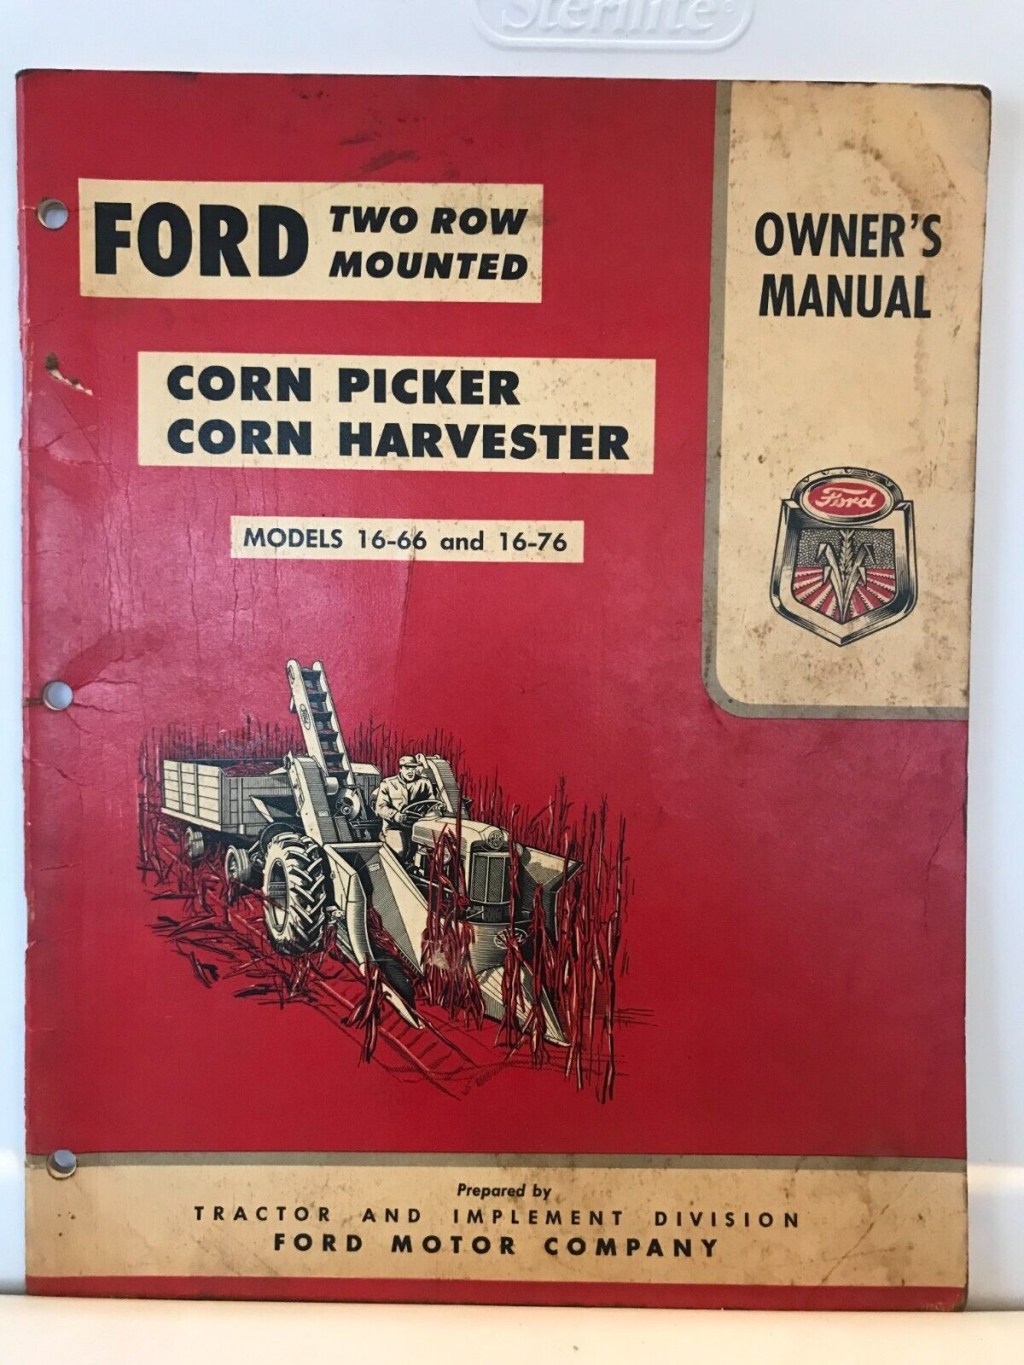 Picture of: Ford Two Row Mounted Corn Picker Harvester – & – Owner’s Manual  Original